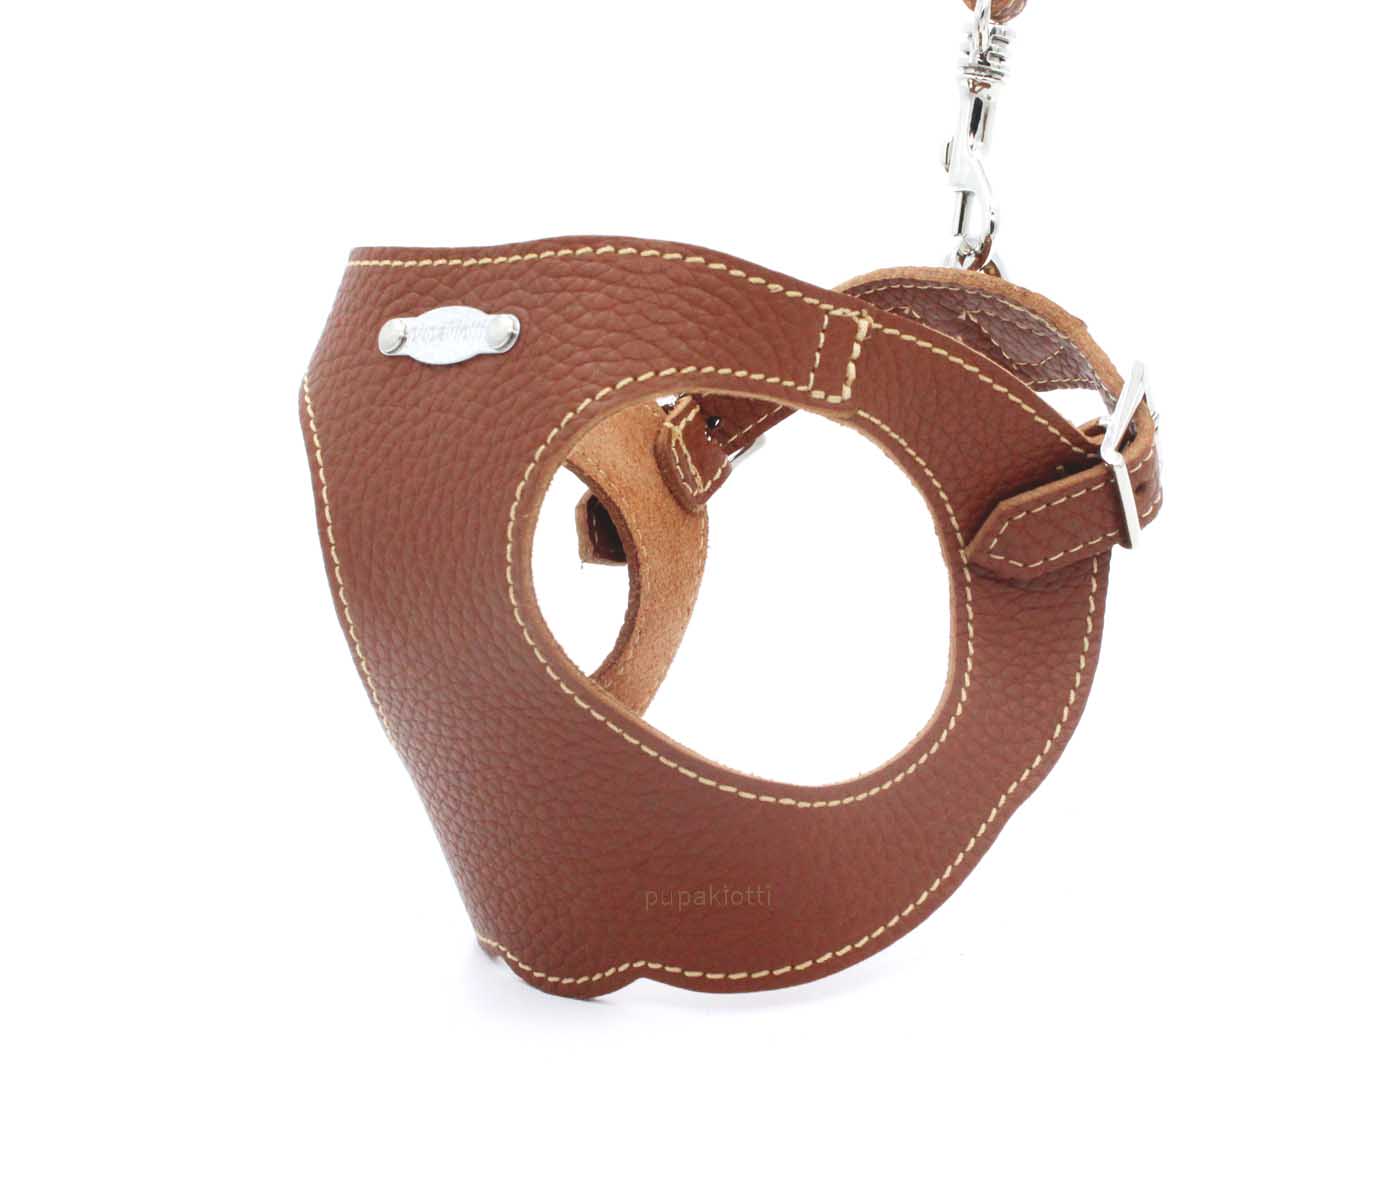 Basic. 3 pieces set. Leather Harness and leash with poop bags dispenser for dogs